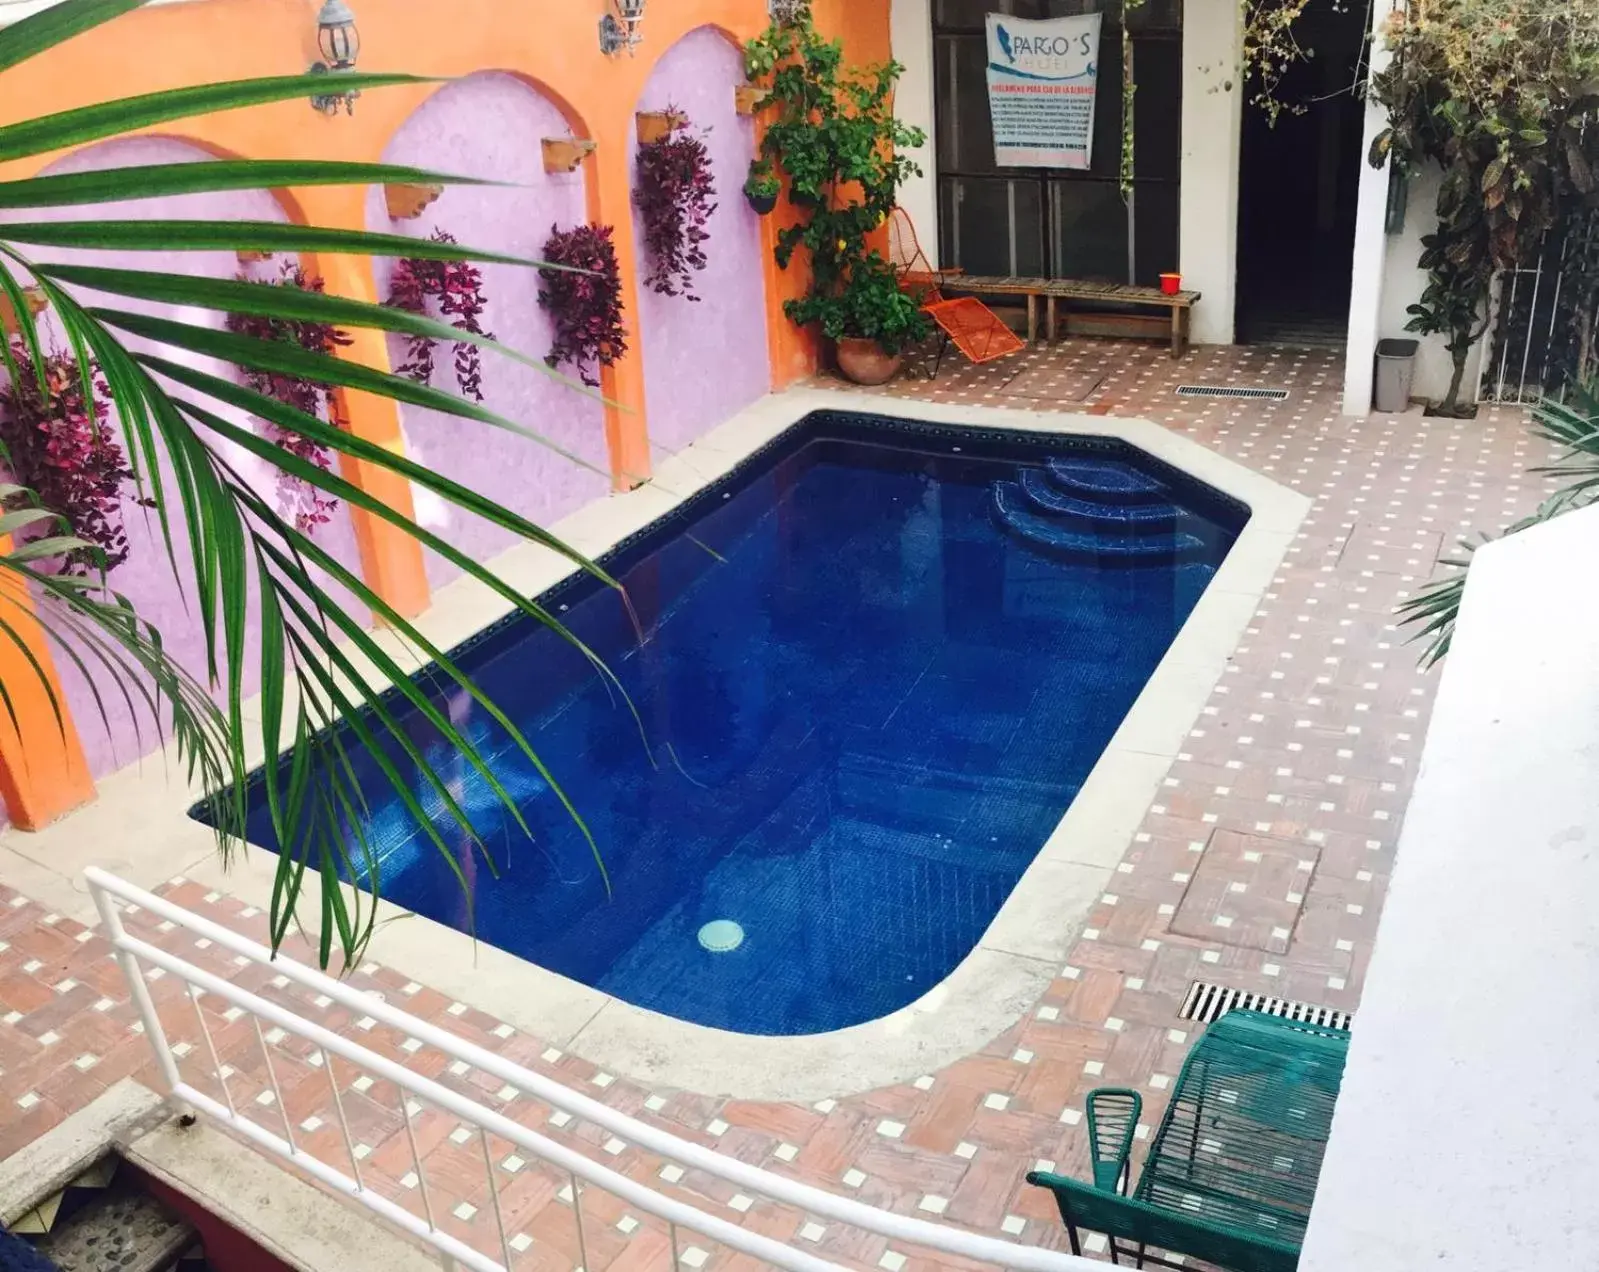 Swimming Pool in Pargos Hotel & Cowork